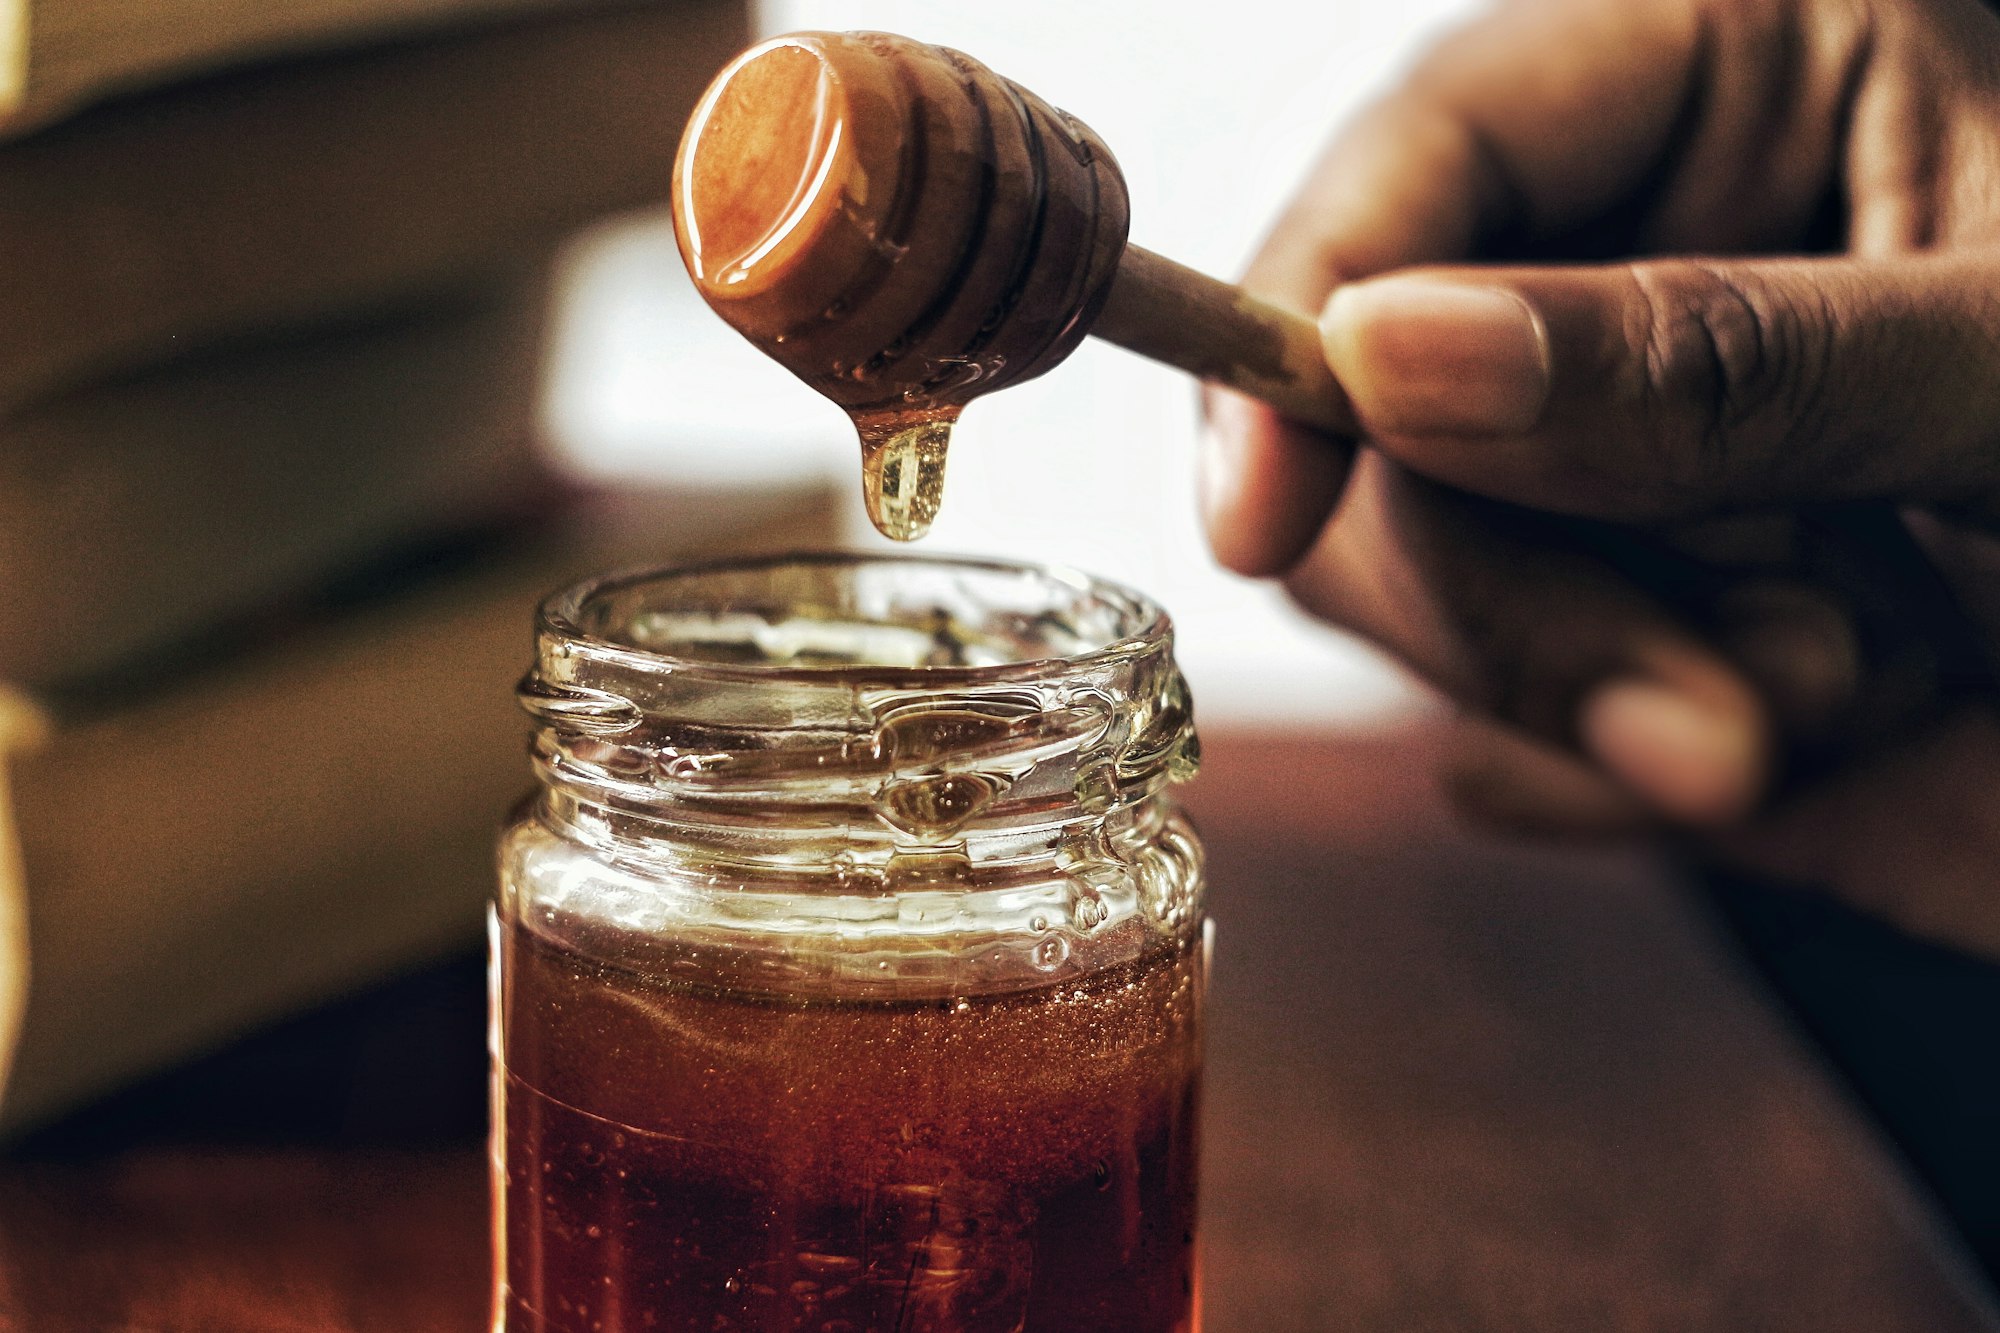 Honey containing trehalulose, a disaccharide of glucose and fructose and isomer of sucrose, which may tackle diabetes